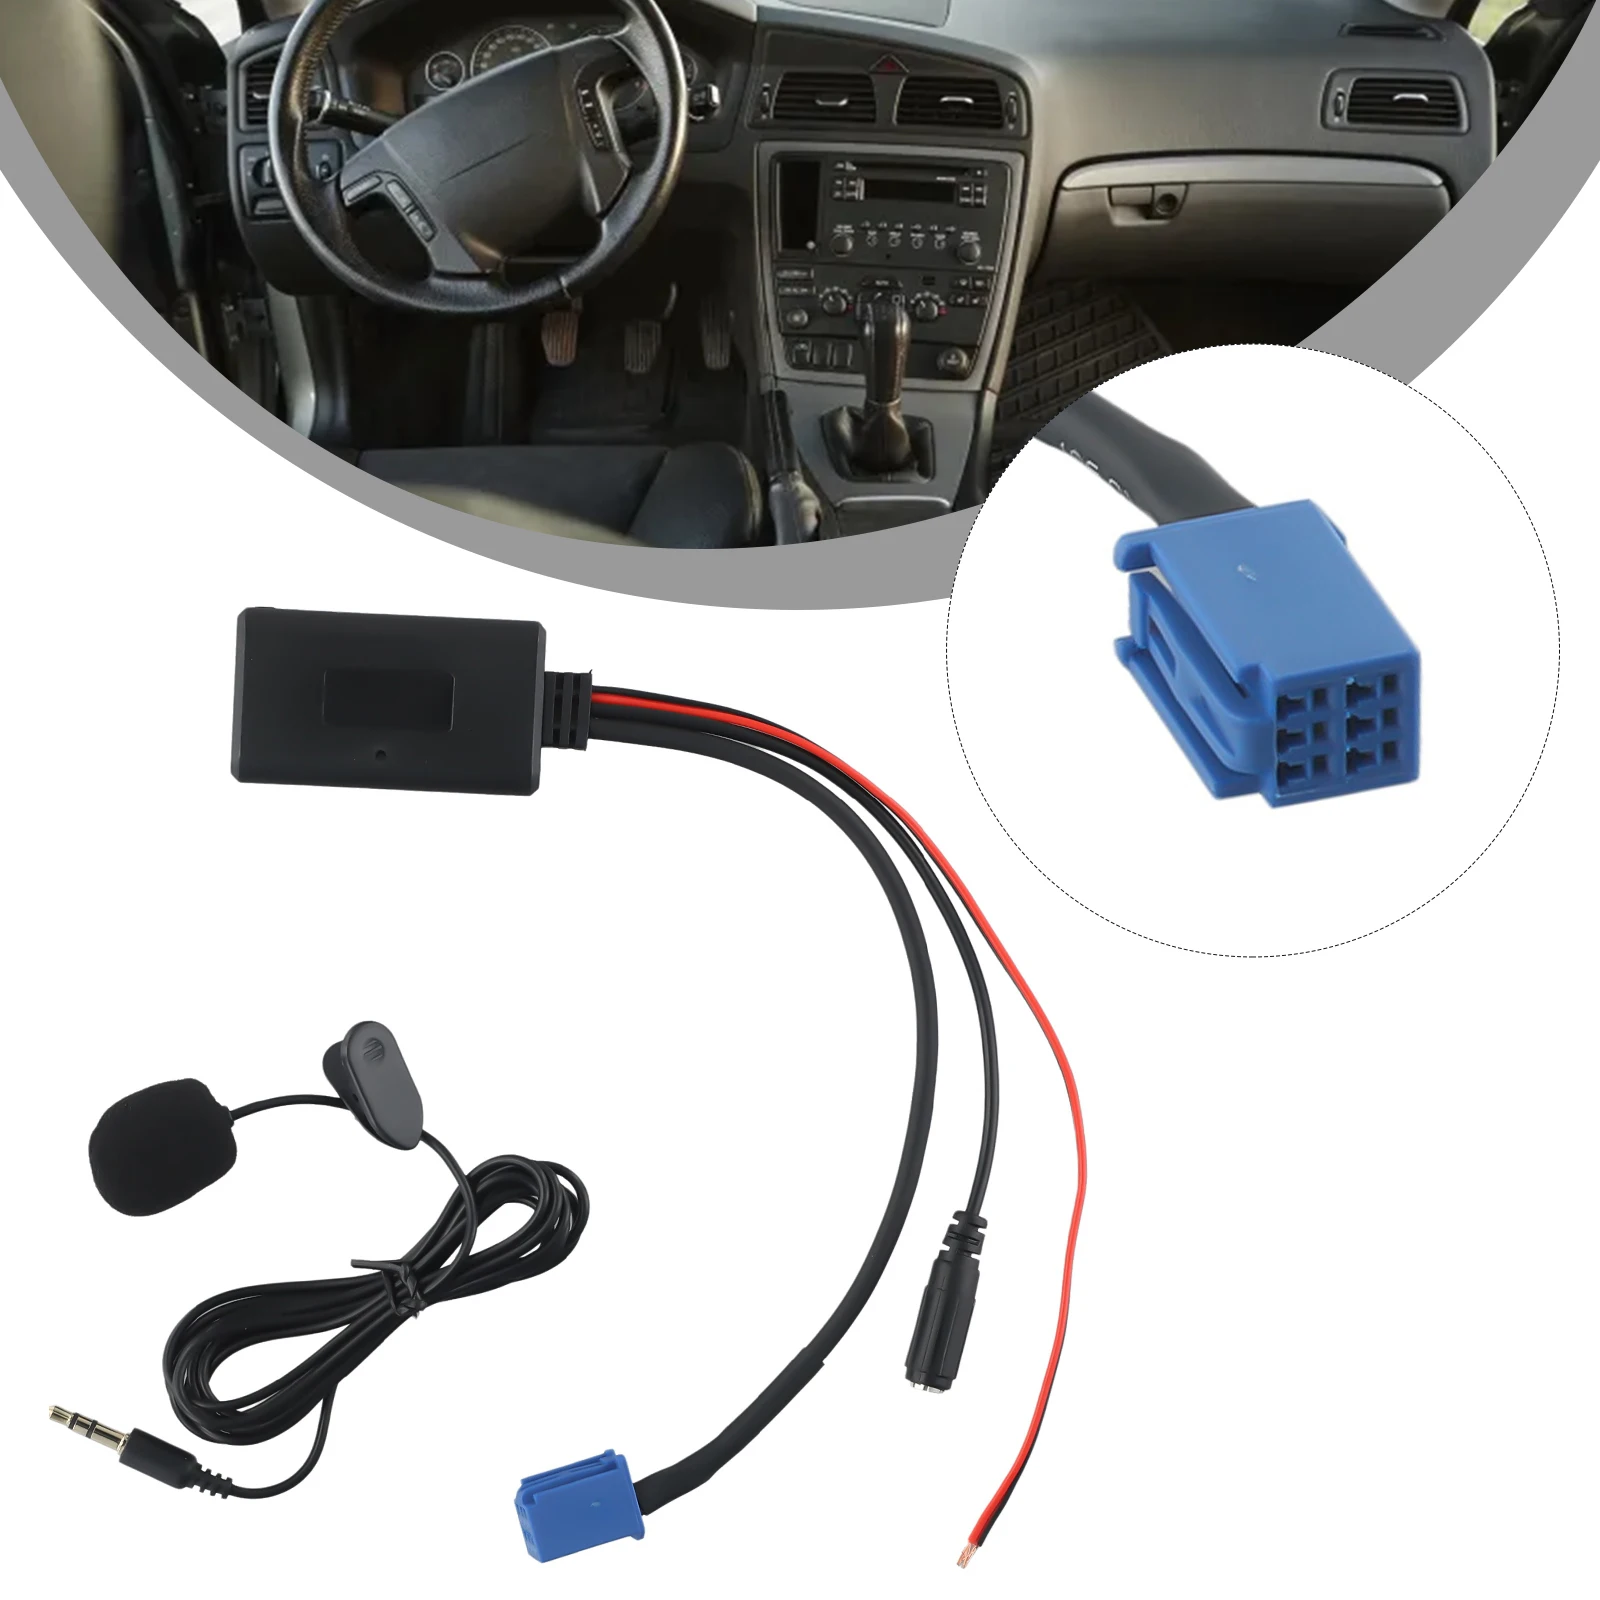 

1pcs Adapter Cable ABS BT5.0 Version Brand New For Lexus IS-F 08 I 50 IS350 LS460 Module Vehicle Handsfree Accessories